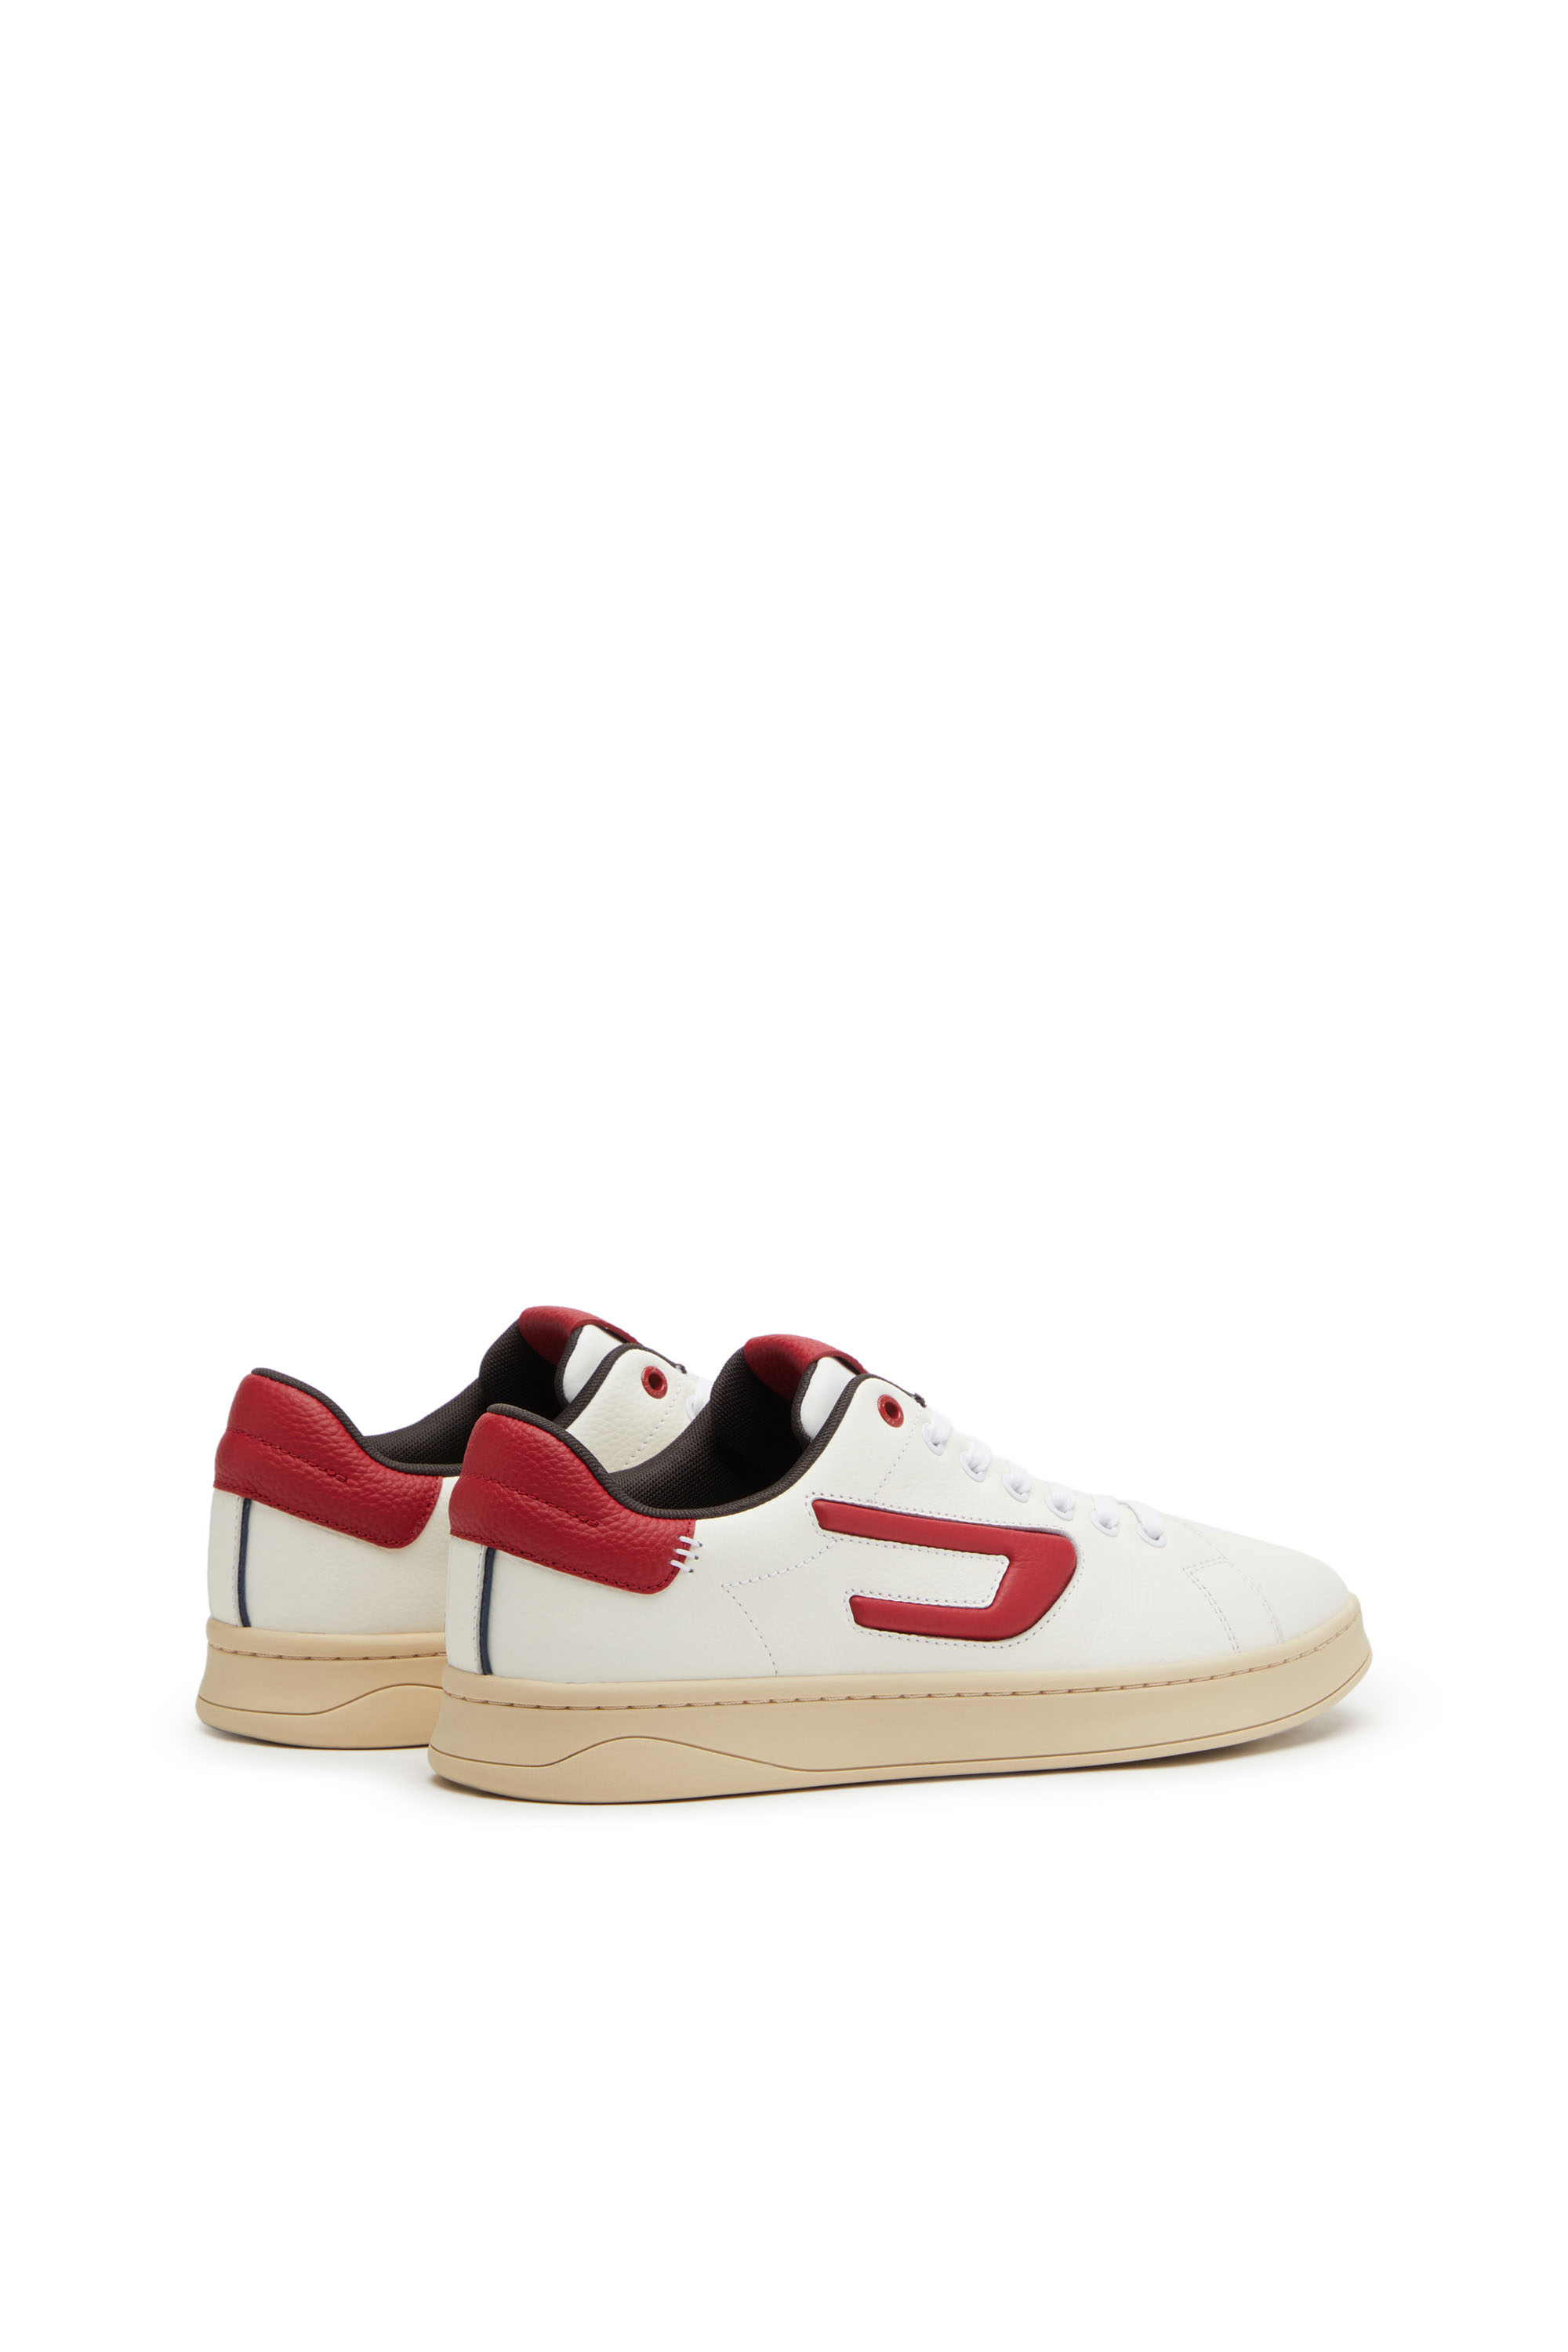 Diesel - S-ATHENE LOW, Bianco/Rosso - Image 3